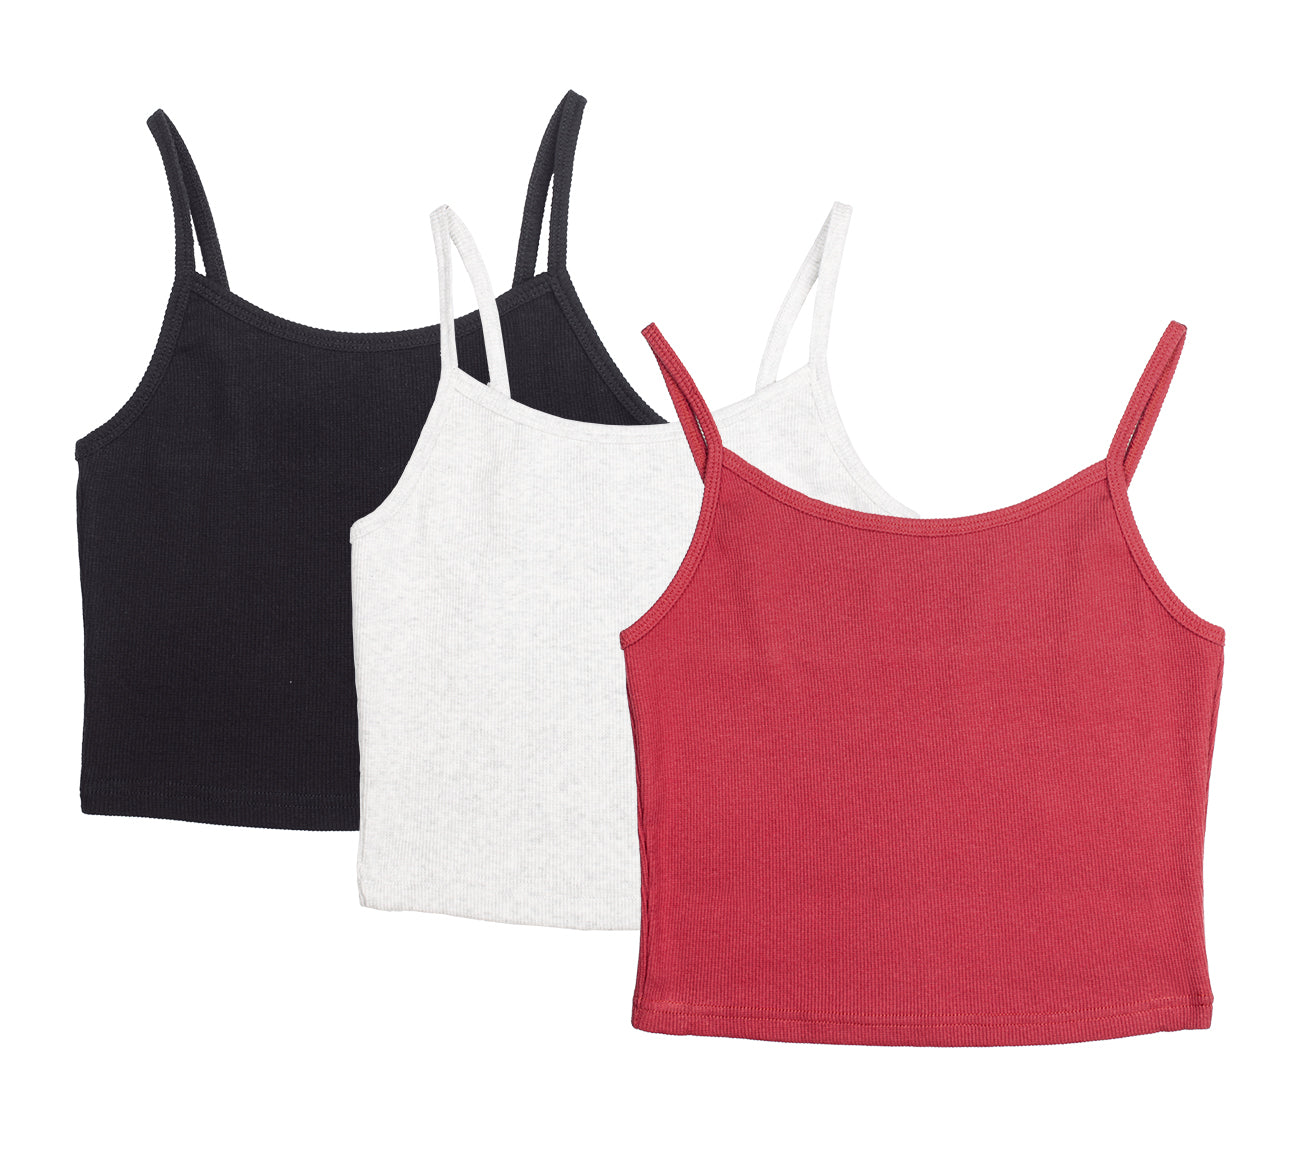 Basic Long Tank Top with Spaghetti Straps